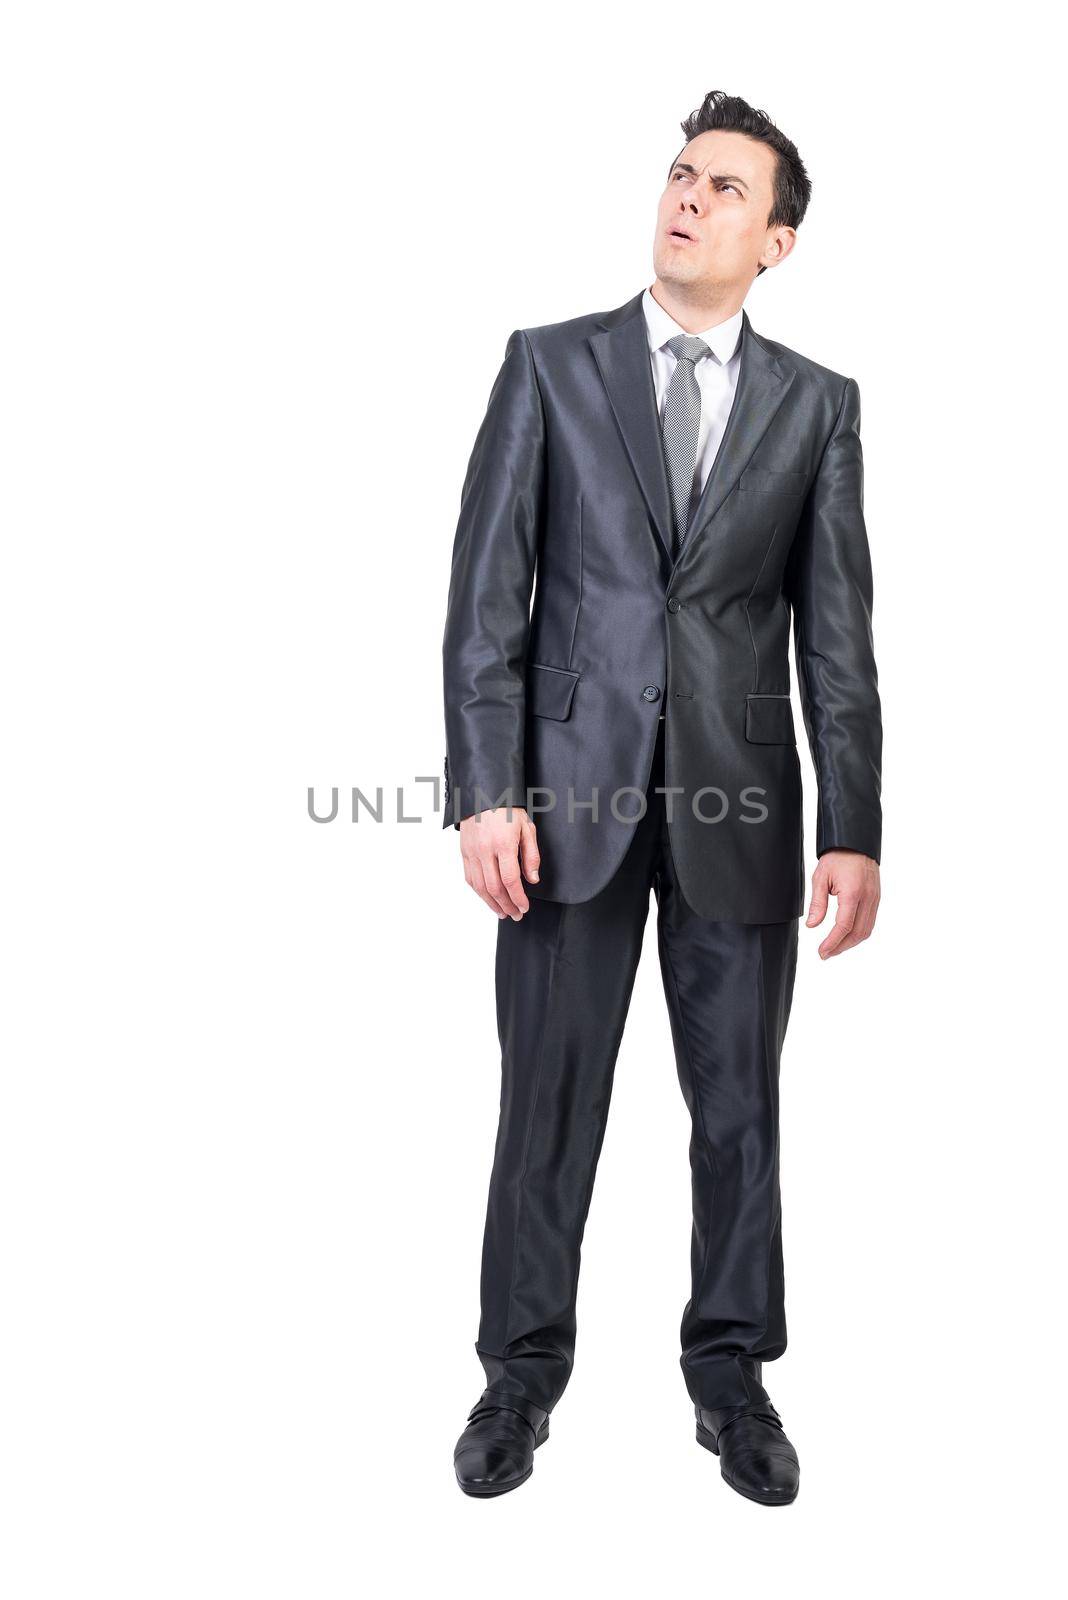 Unsure businessman in suit in studio. White background. by ivanmoreno